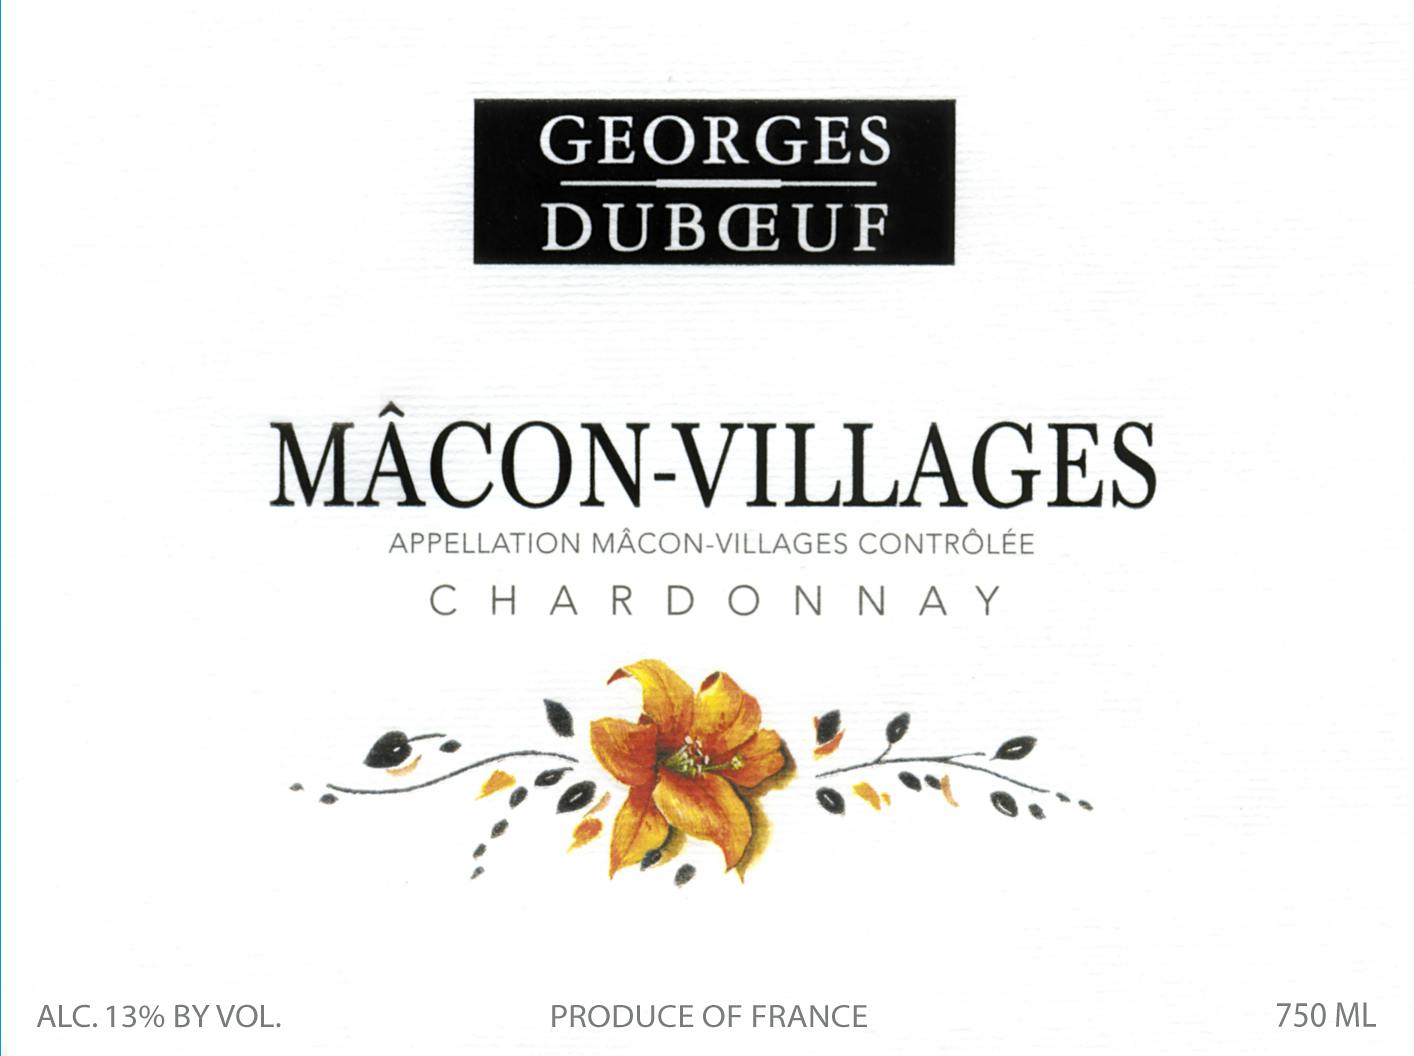 Label for Georges Duboeuf